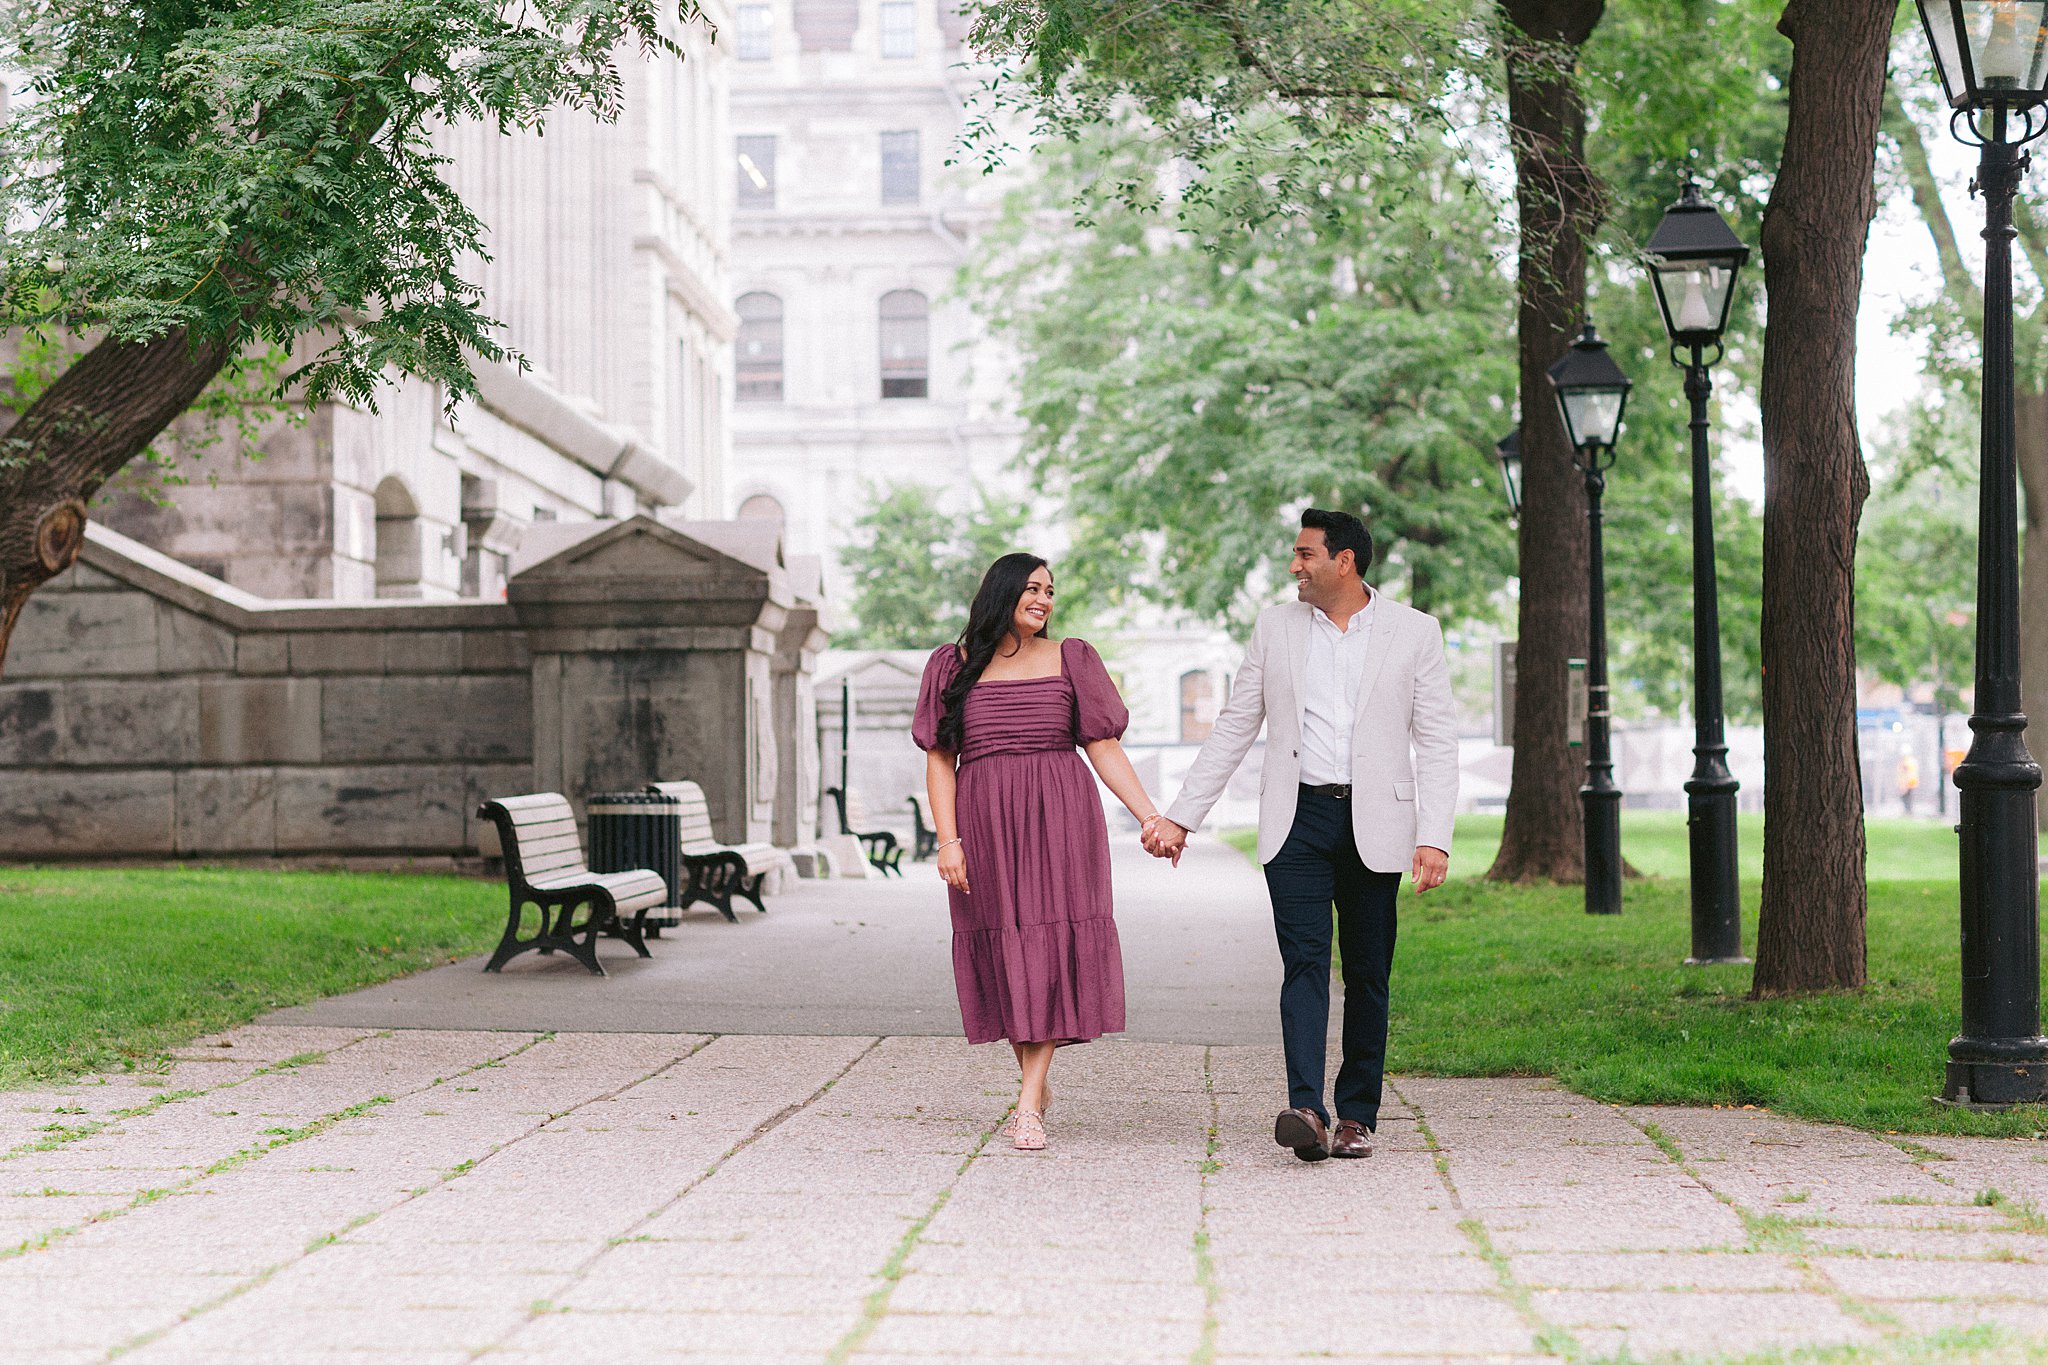 Lovebirds in Montreal: A few photos from their anniversary shoot